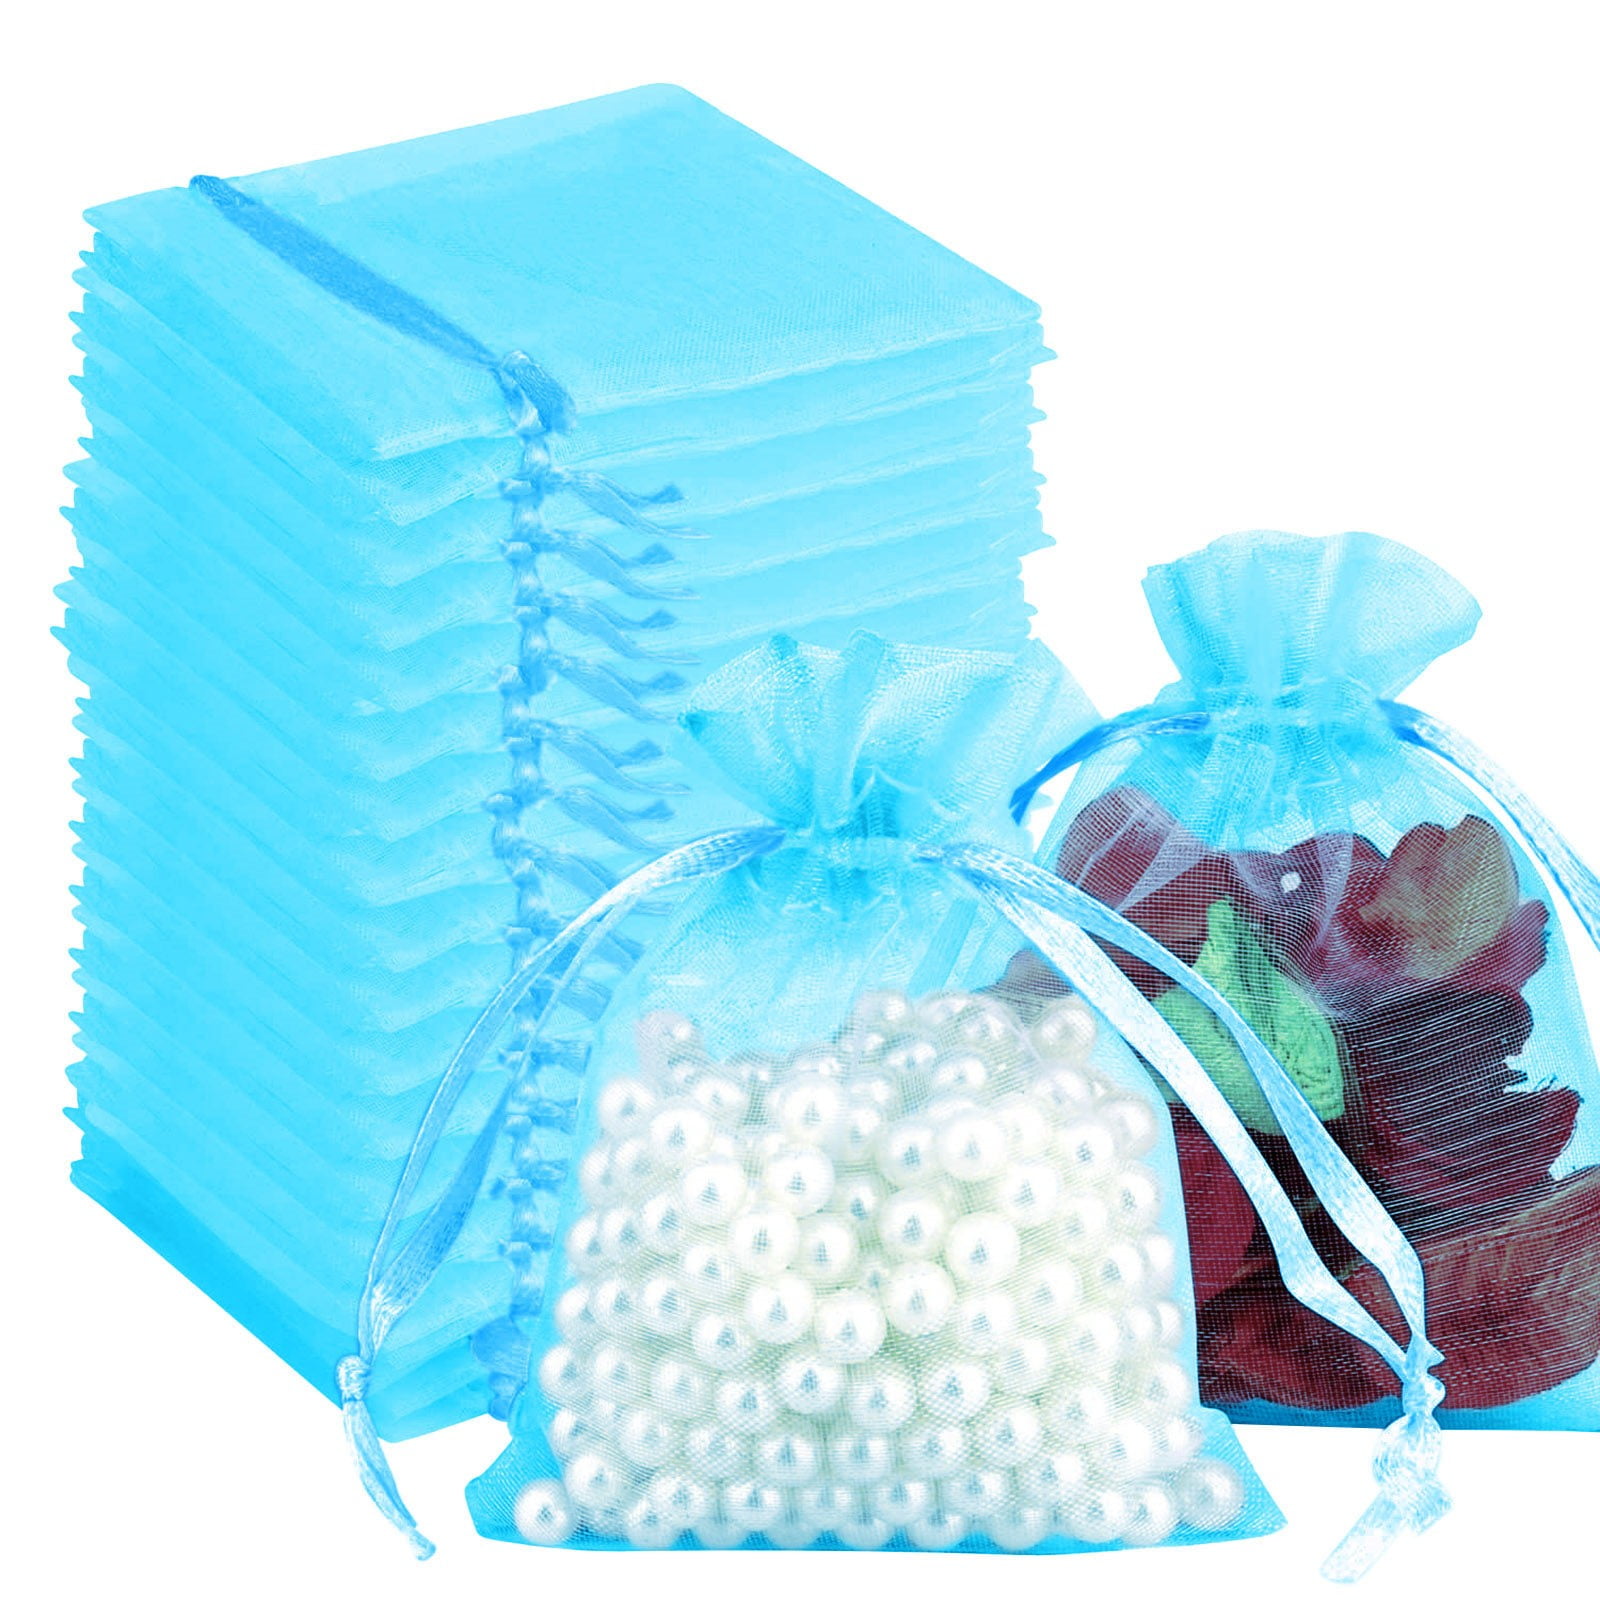 120 sytles ORGANZA GIFT BAG Candy Sheer Jewellery Pouch Wedding Birthday PartyFD 